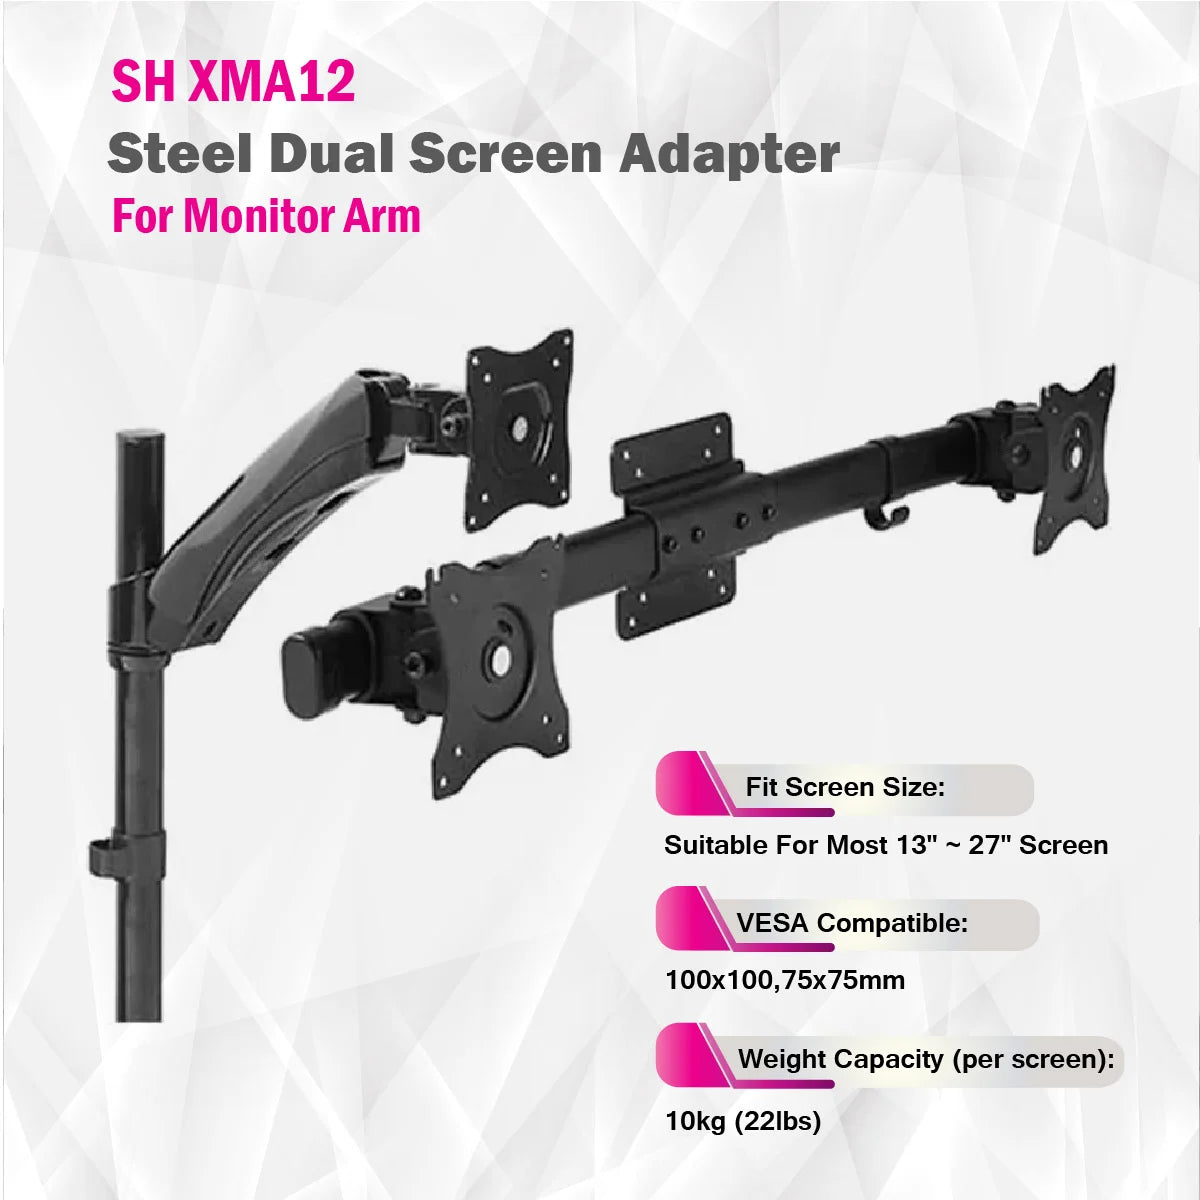 Steel Dual Screen Adapter For Monitor Arm - SH XMA12